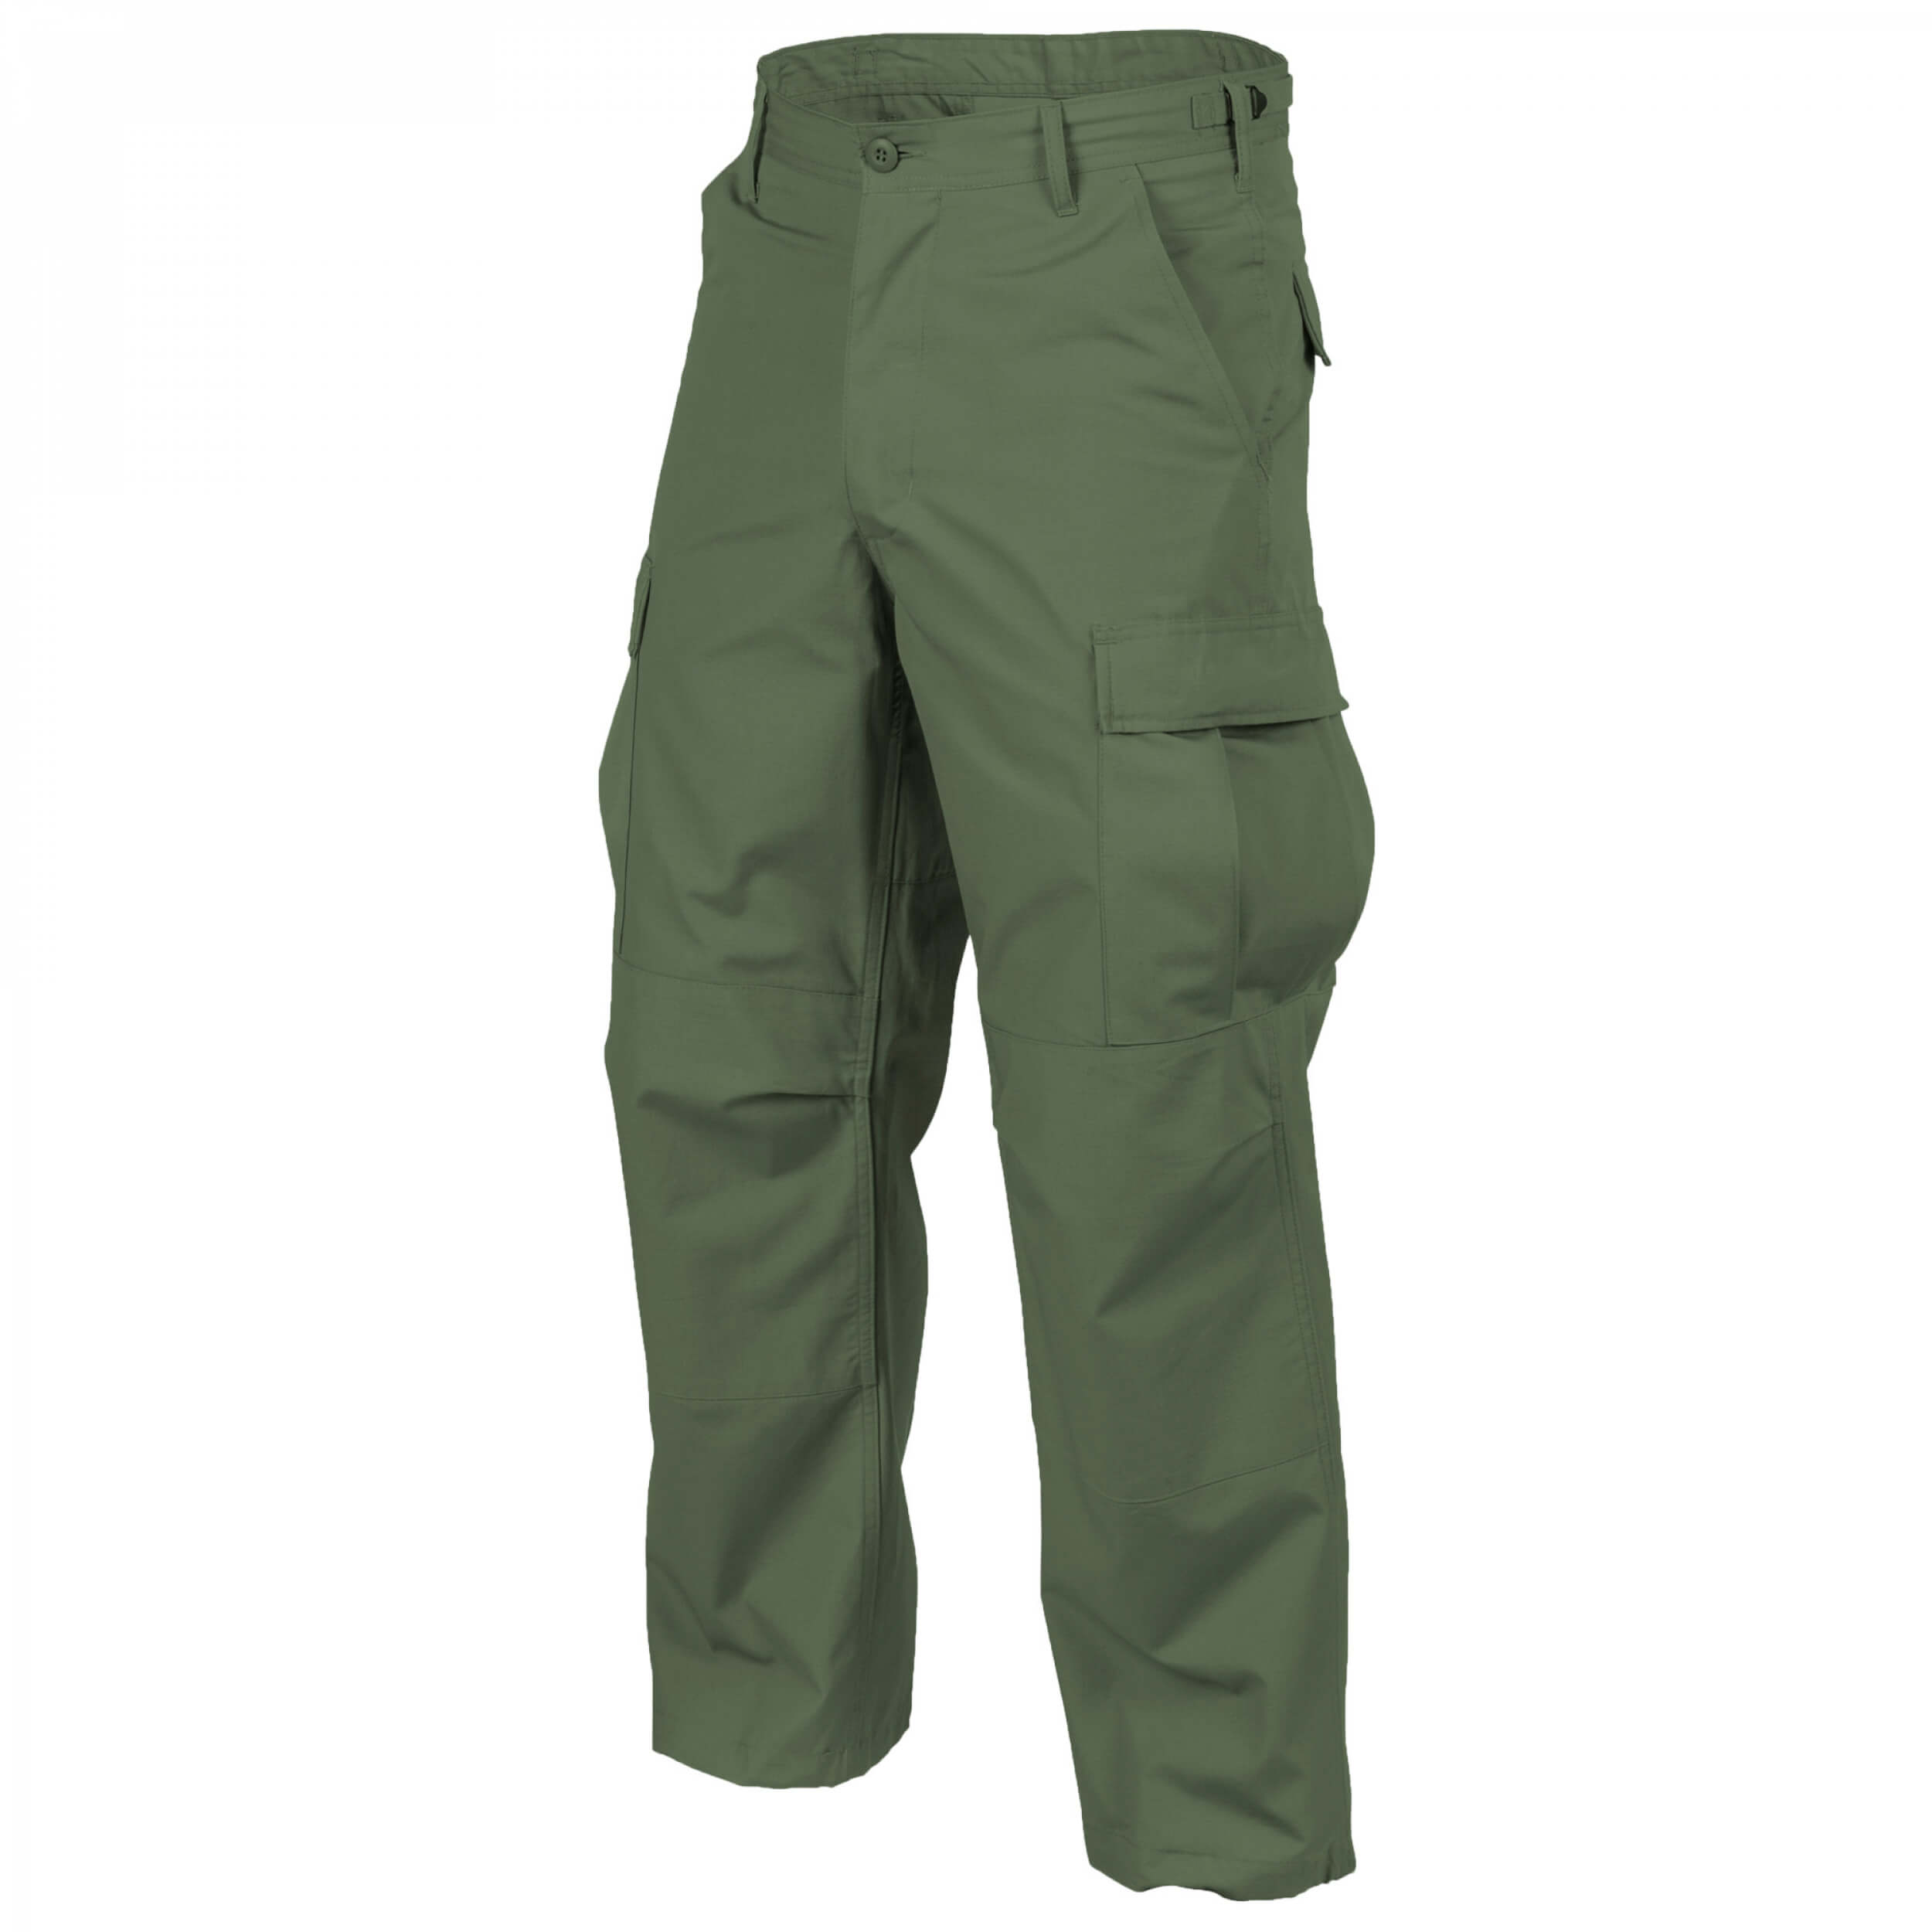 Helikon-Tex BDU Trousers - Cotton Ripstop - Olive Green